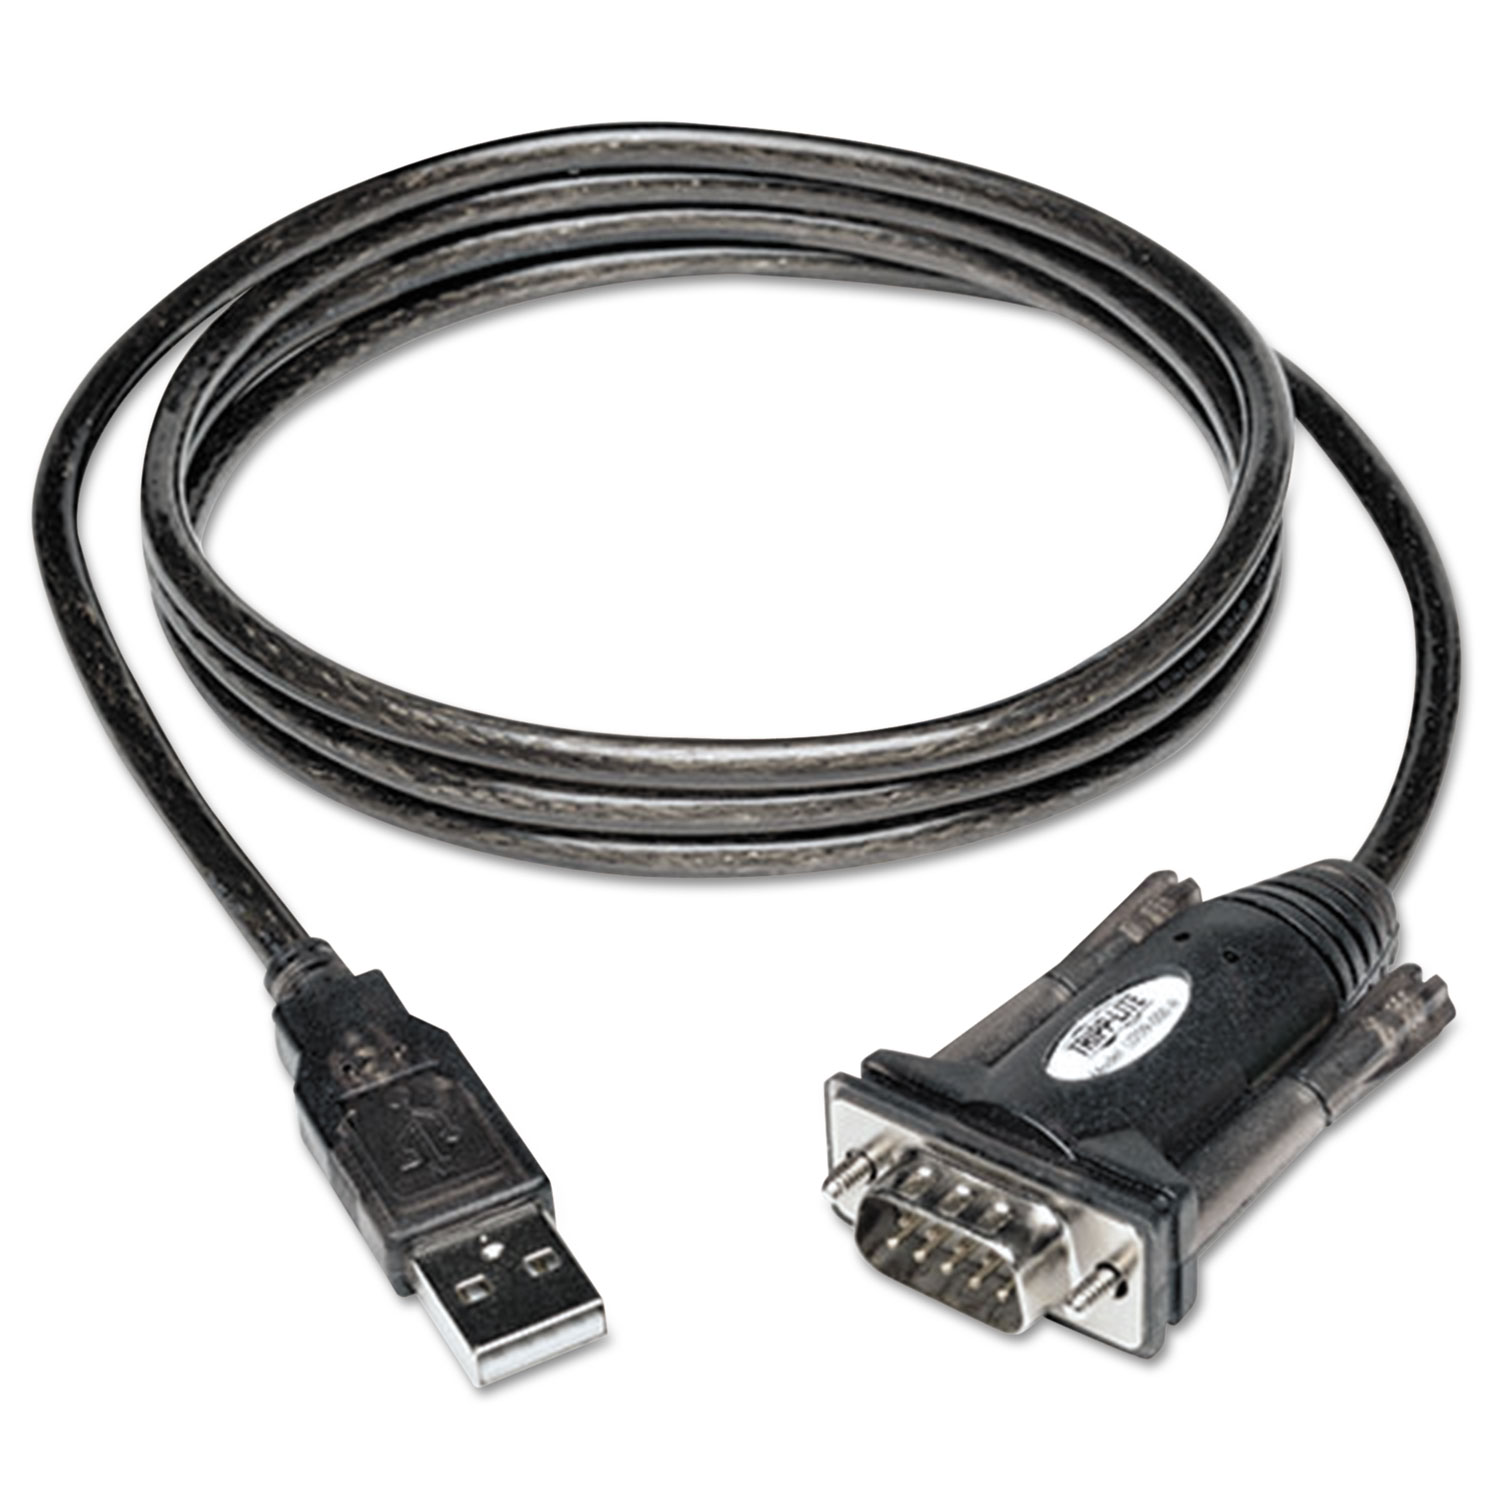 USB to Serial Adapter Cable (USB-A to DB9 M/M), 5-ft.